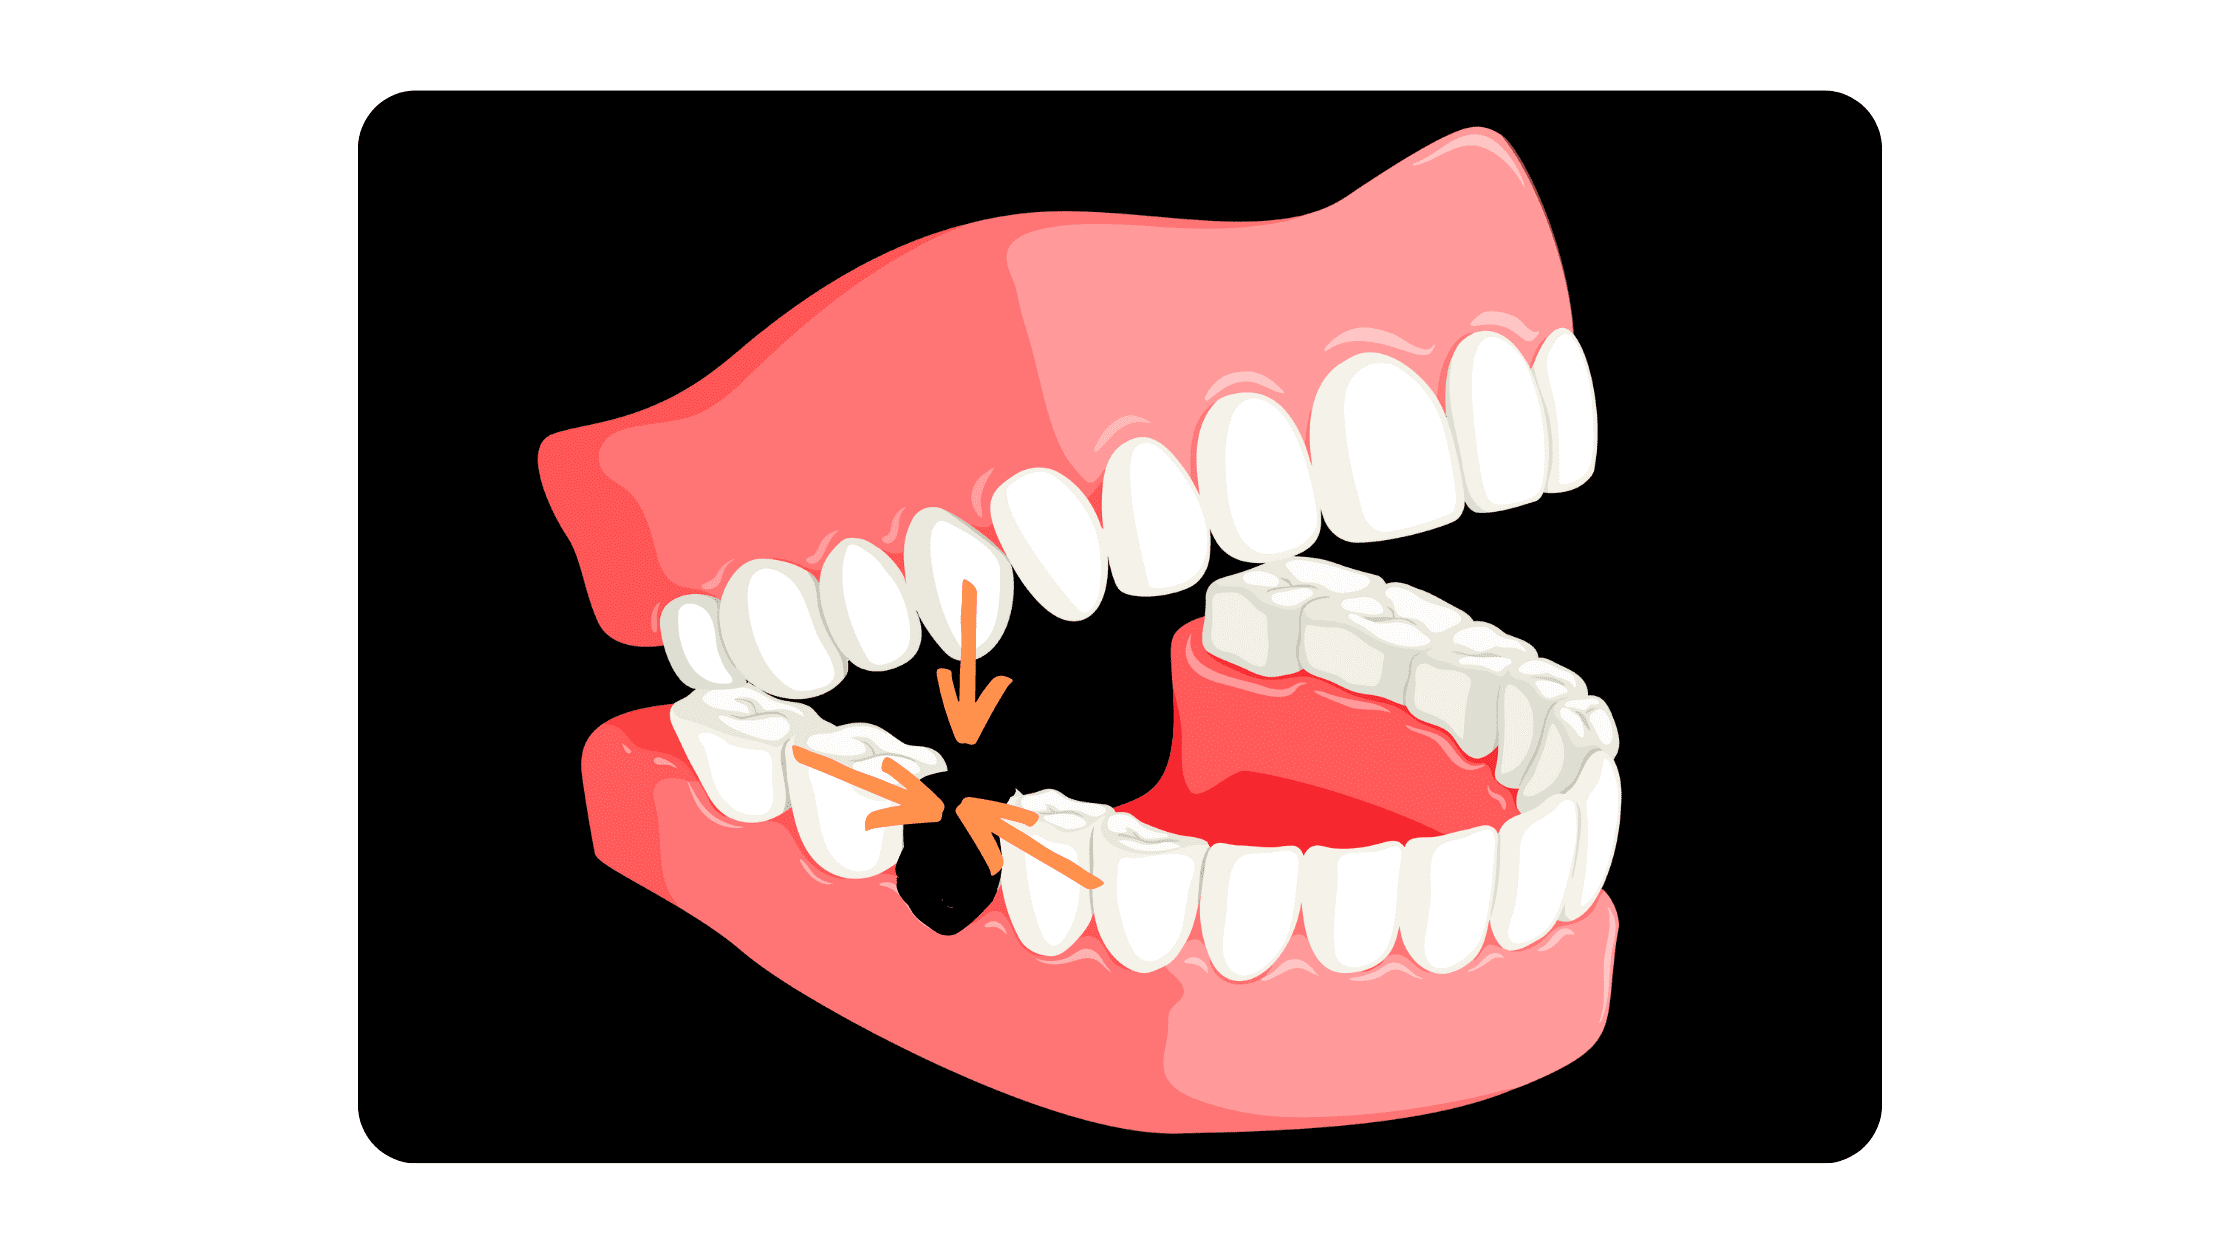 Teeth shifting after tooth extraction